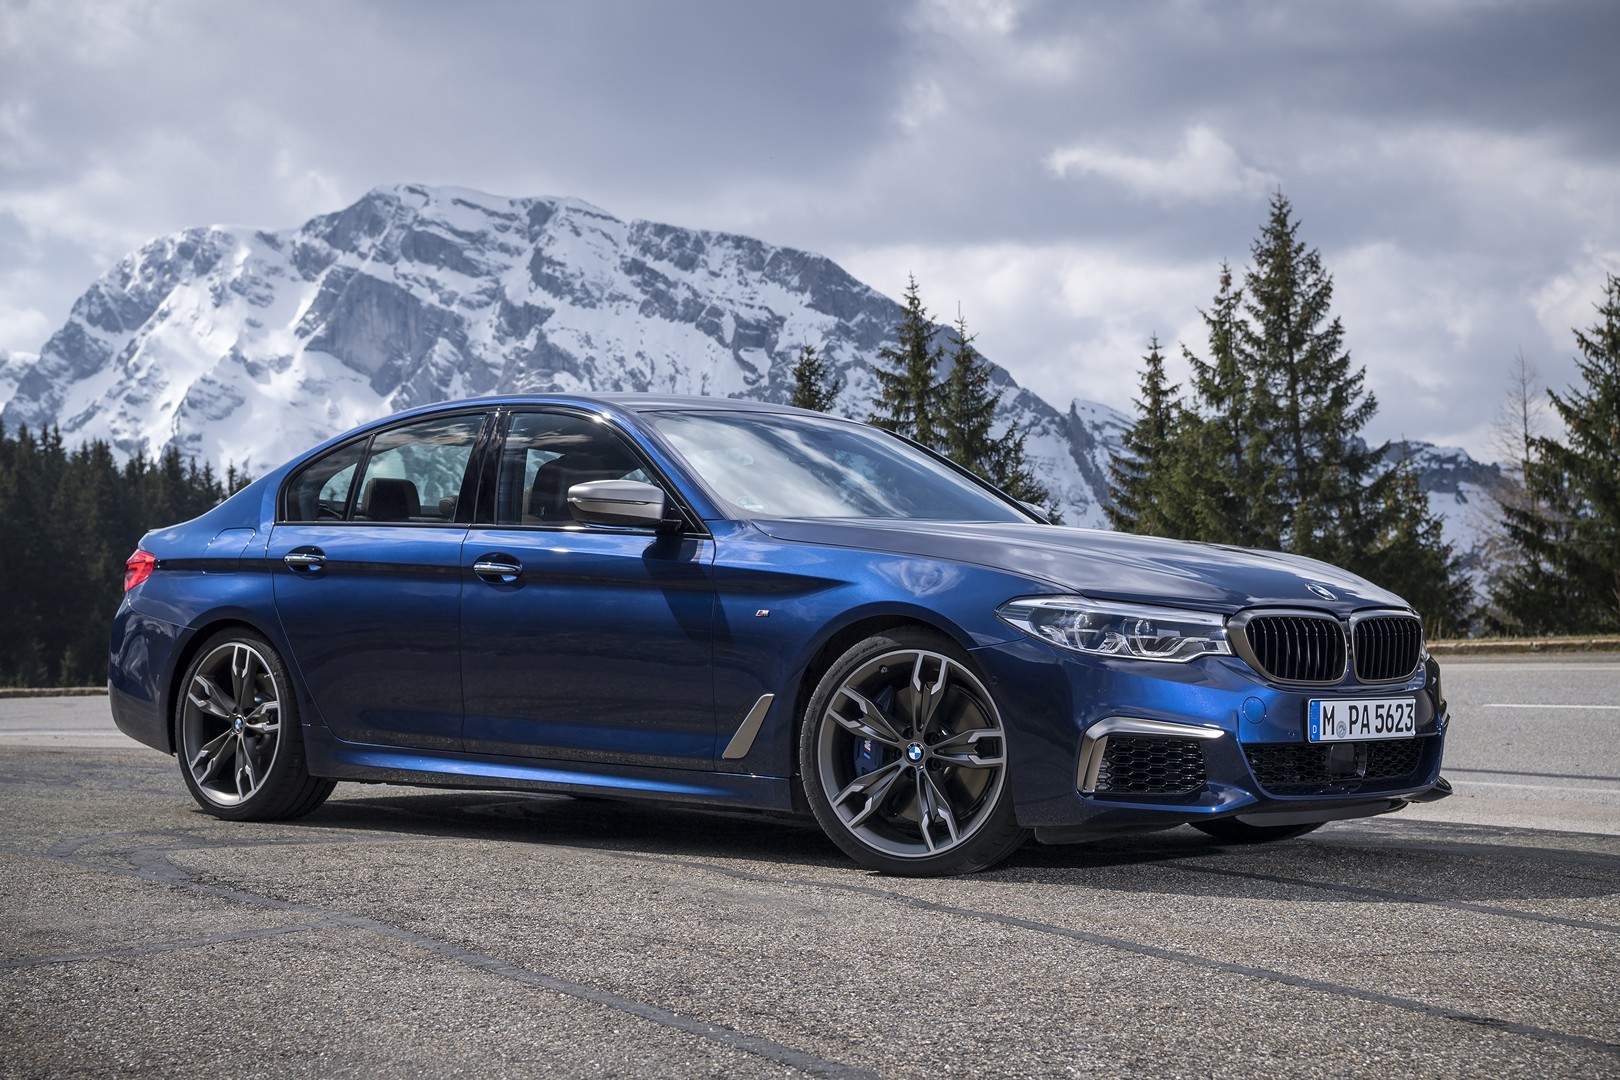 https://s1.cdn.autoevolution.com/images/news/gallery/bmw-squeezes-out-more-power-from-x3-m40i-x4-m40i-m550i-xdrive-in-the-us_8.jpg